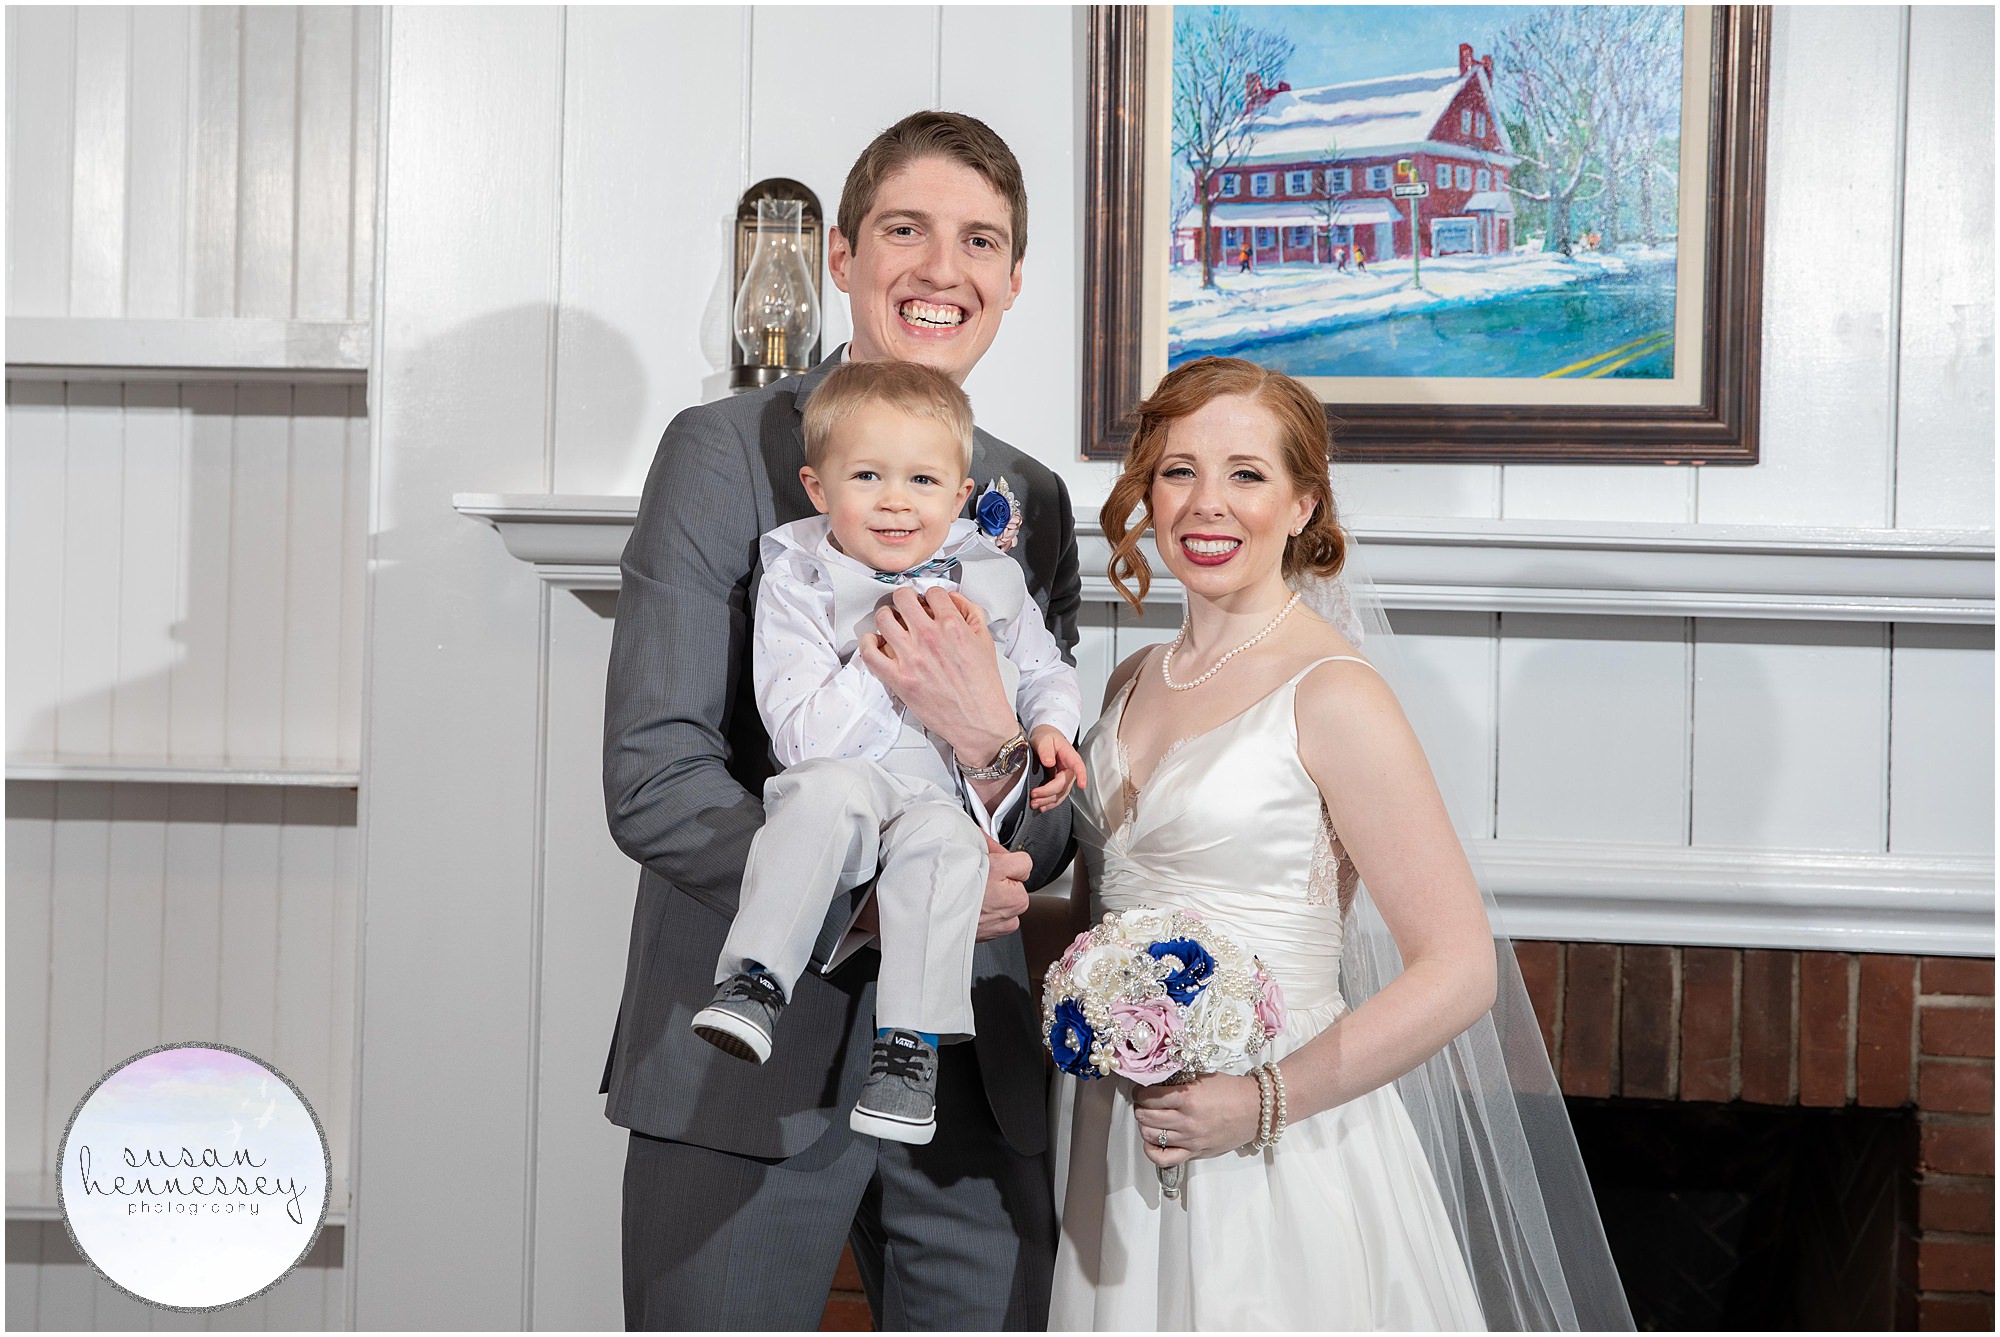 Bride and groom pose with adorable toddler